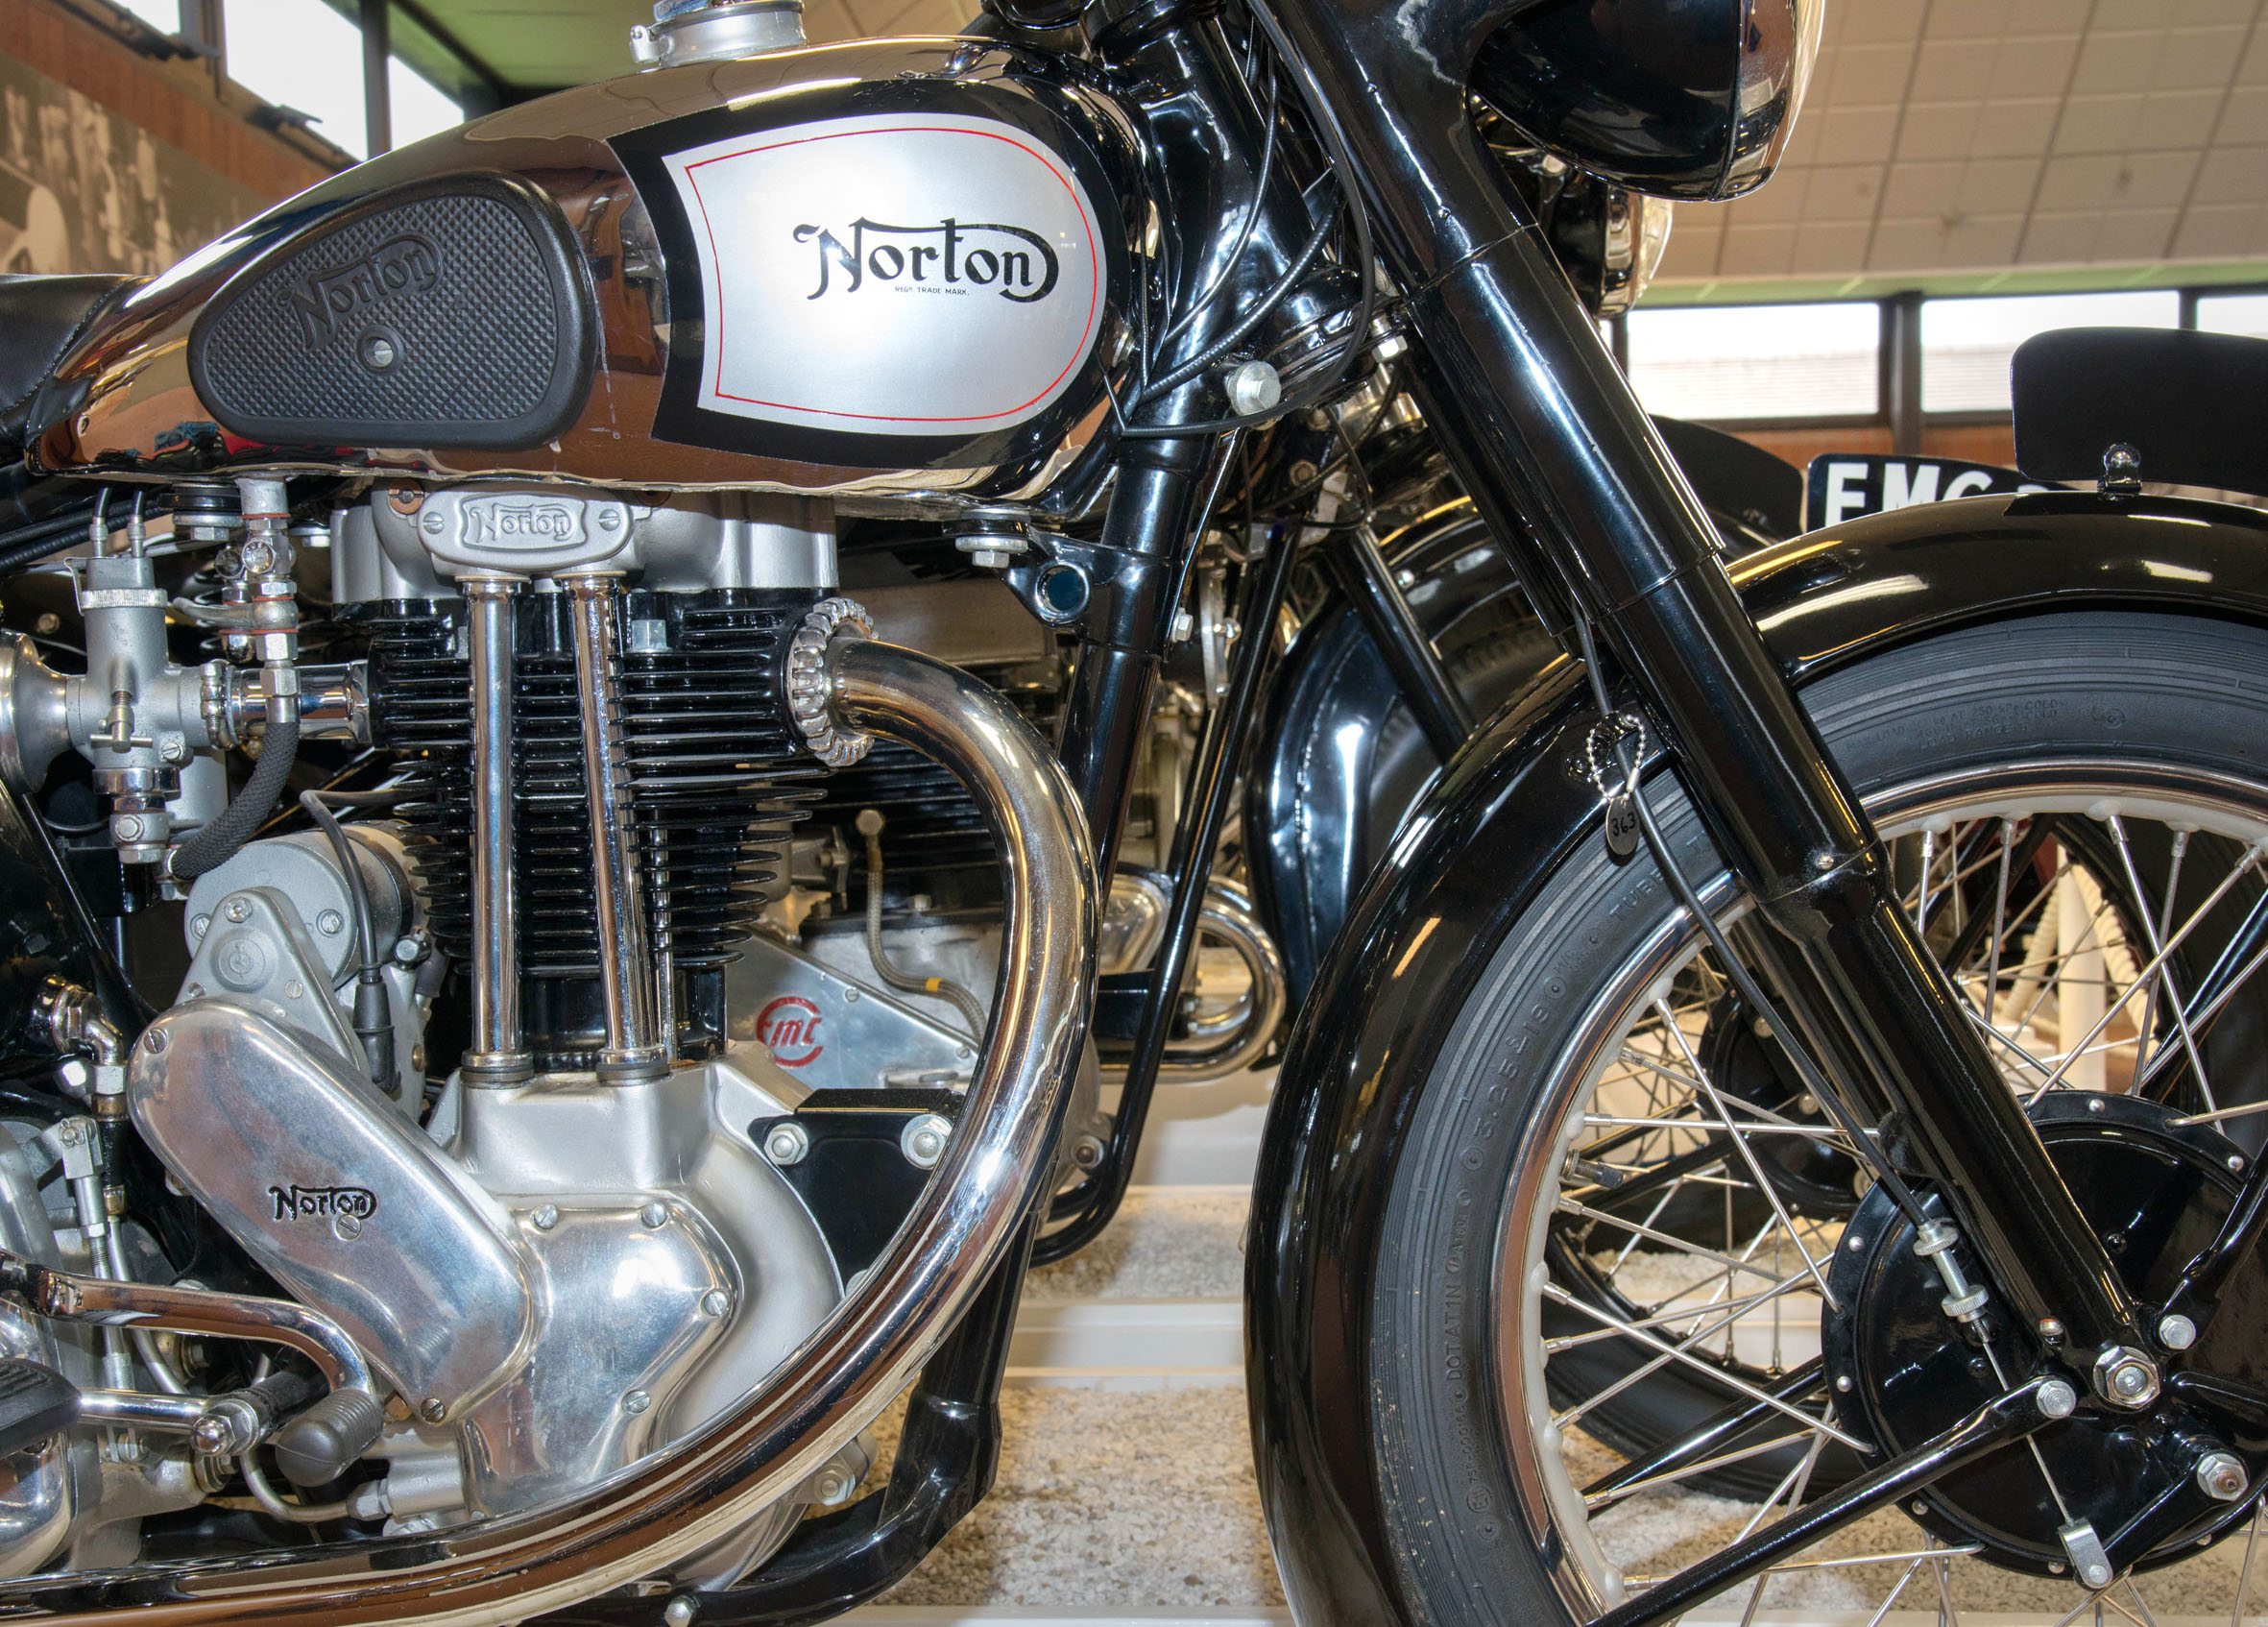 Caring for your classic motorcycle over winter